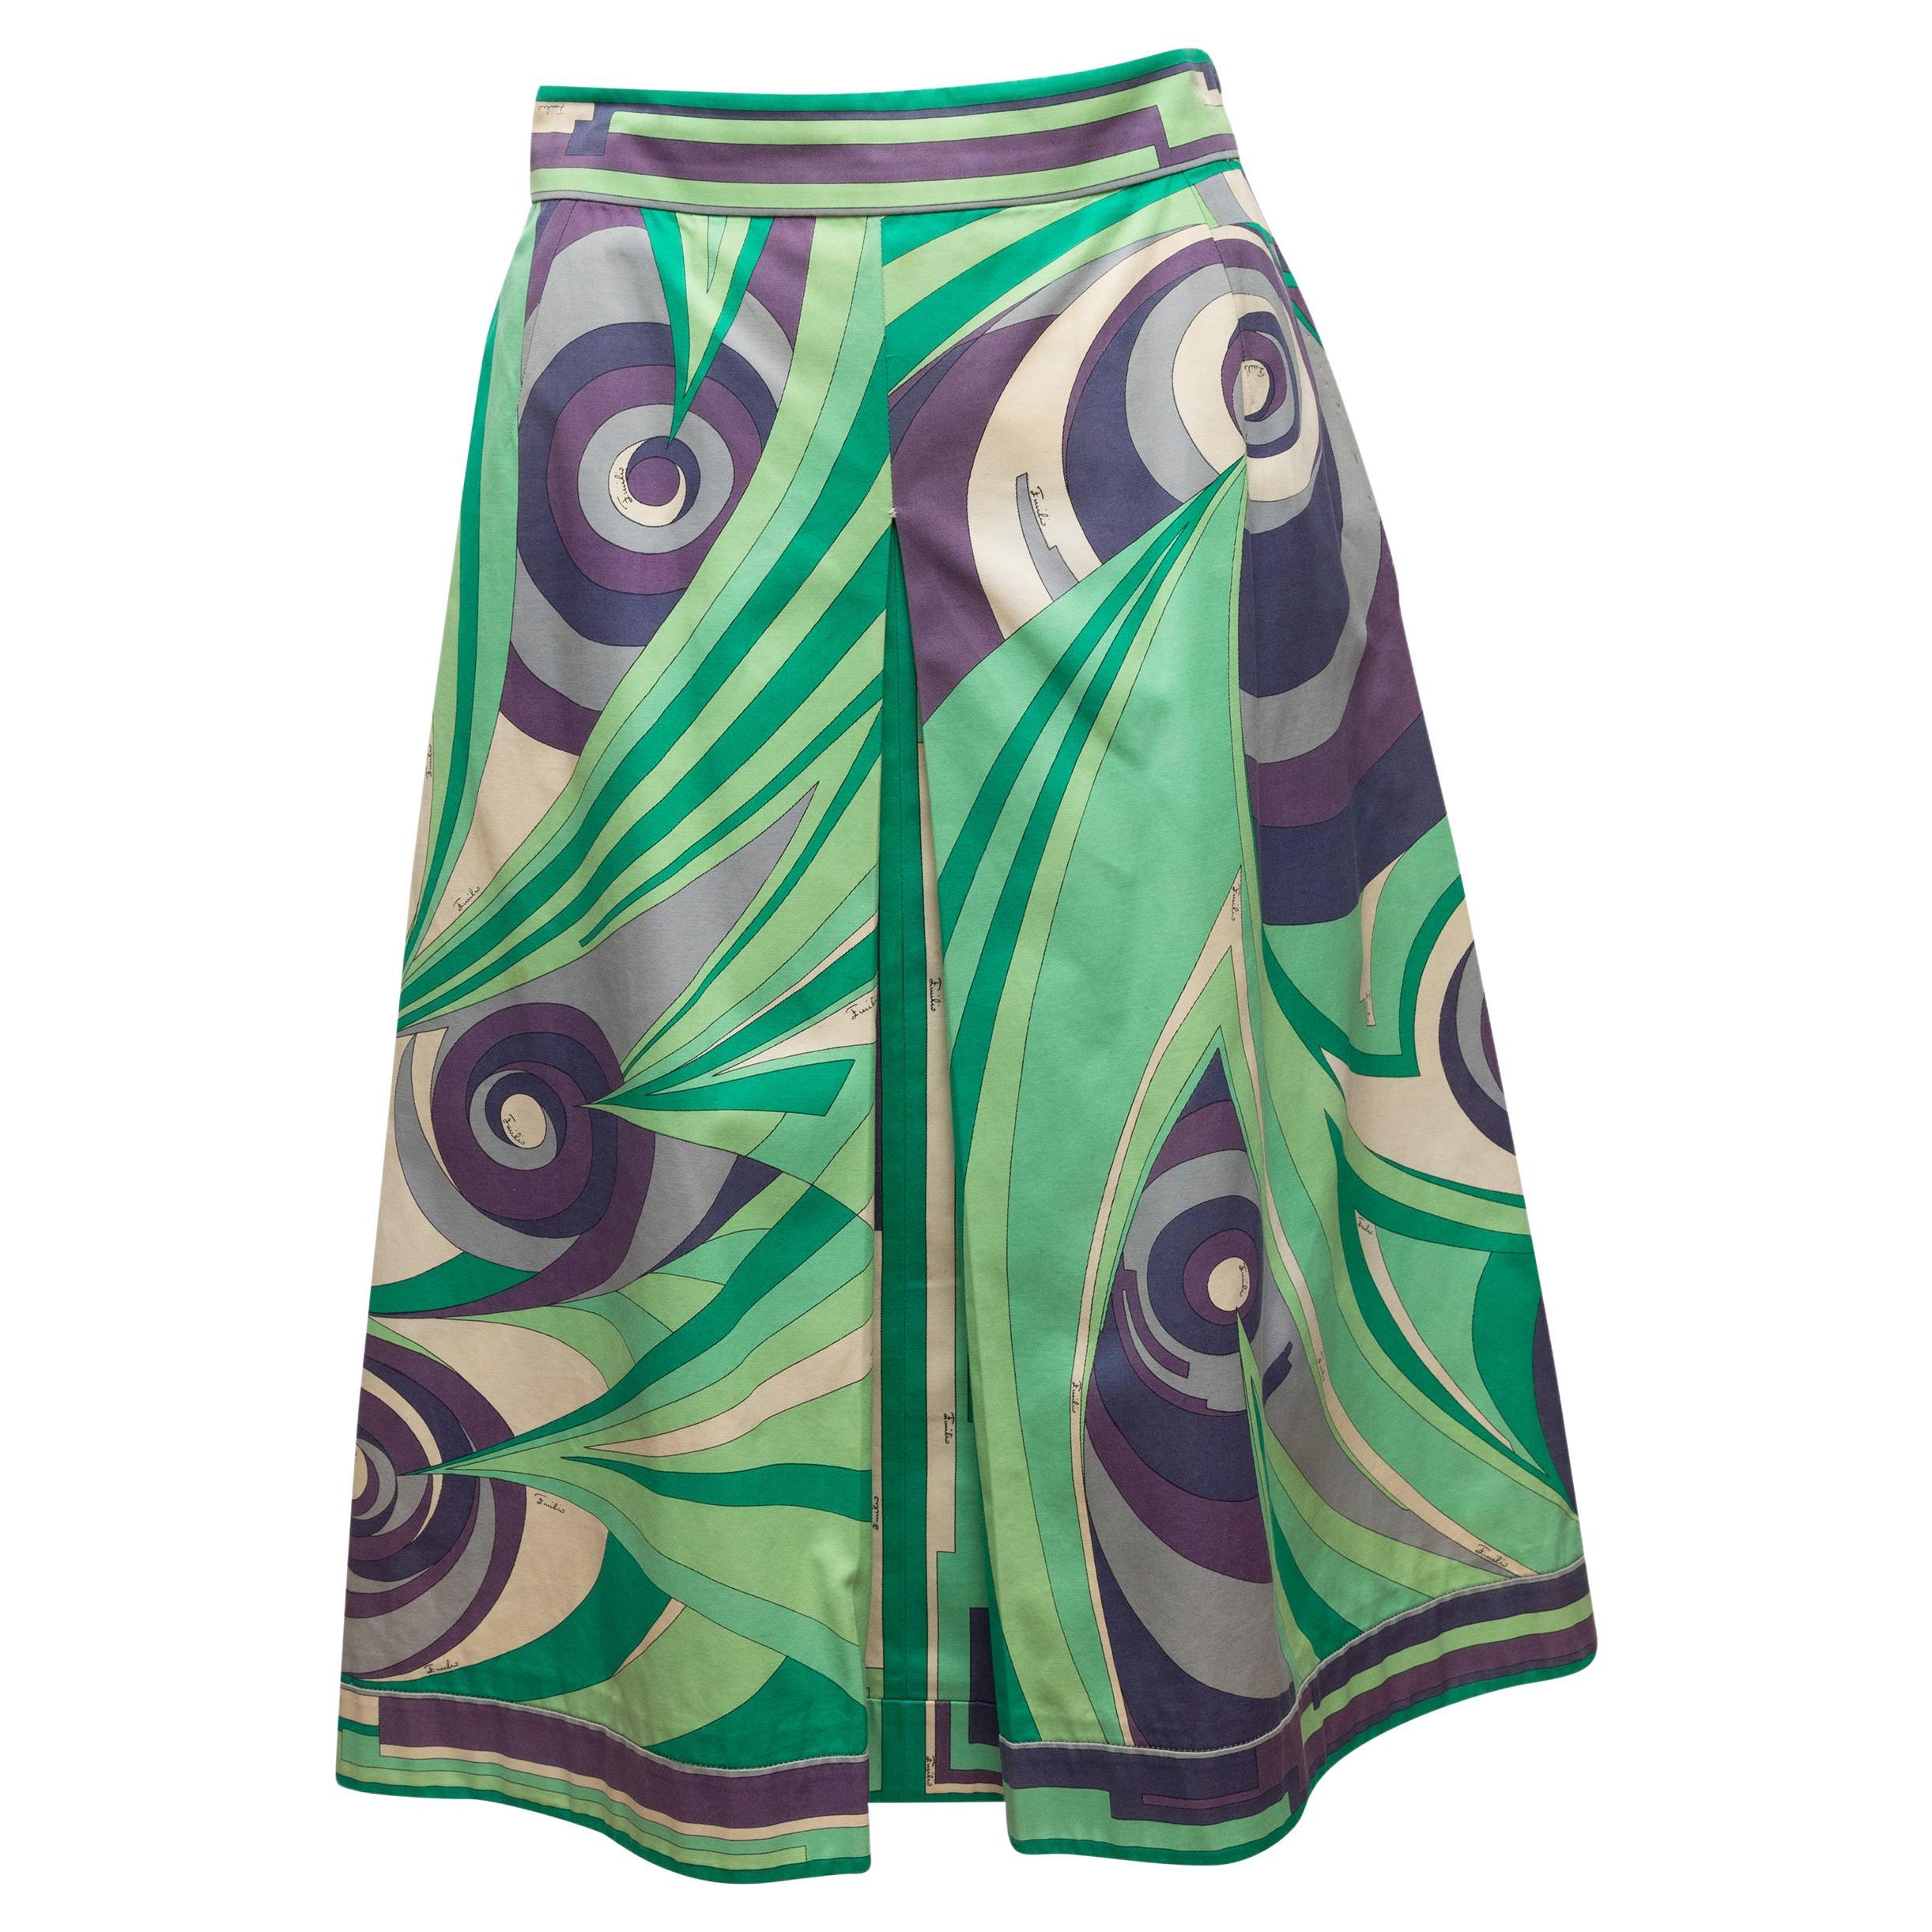 Vintage Seafoam and Multicolor Emilio Pucci Abstract Print Skirt